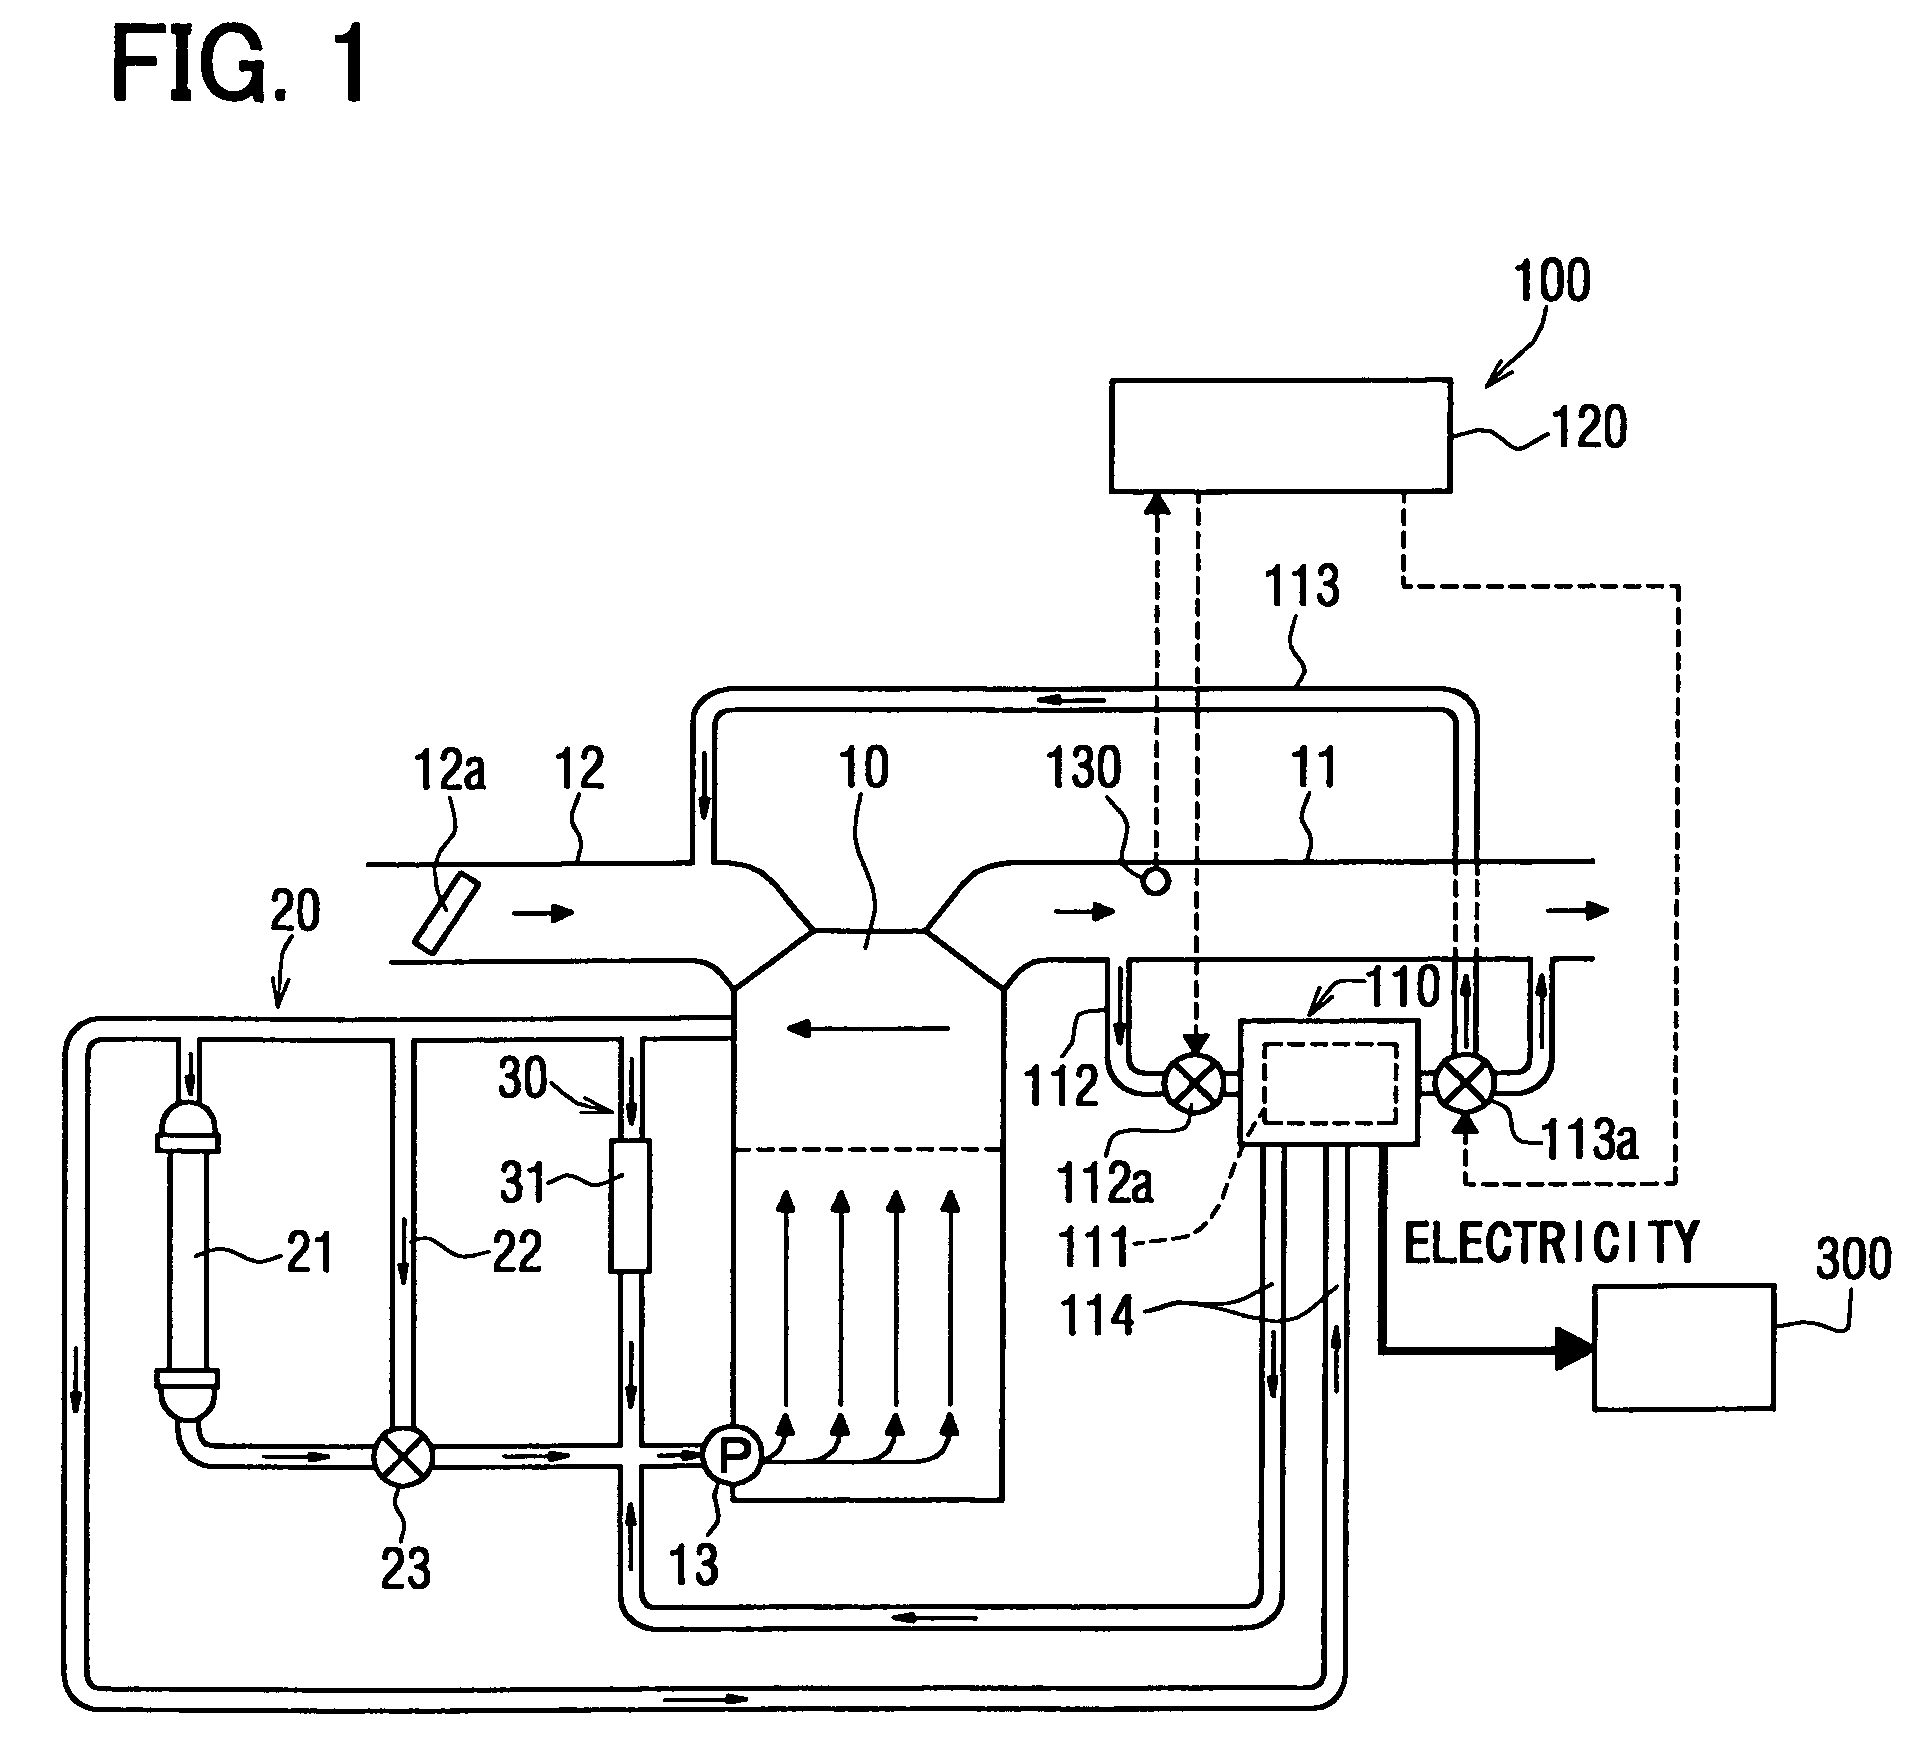 Thermoelectric generating device